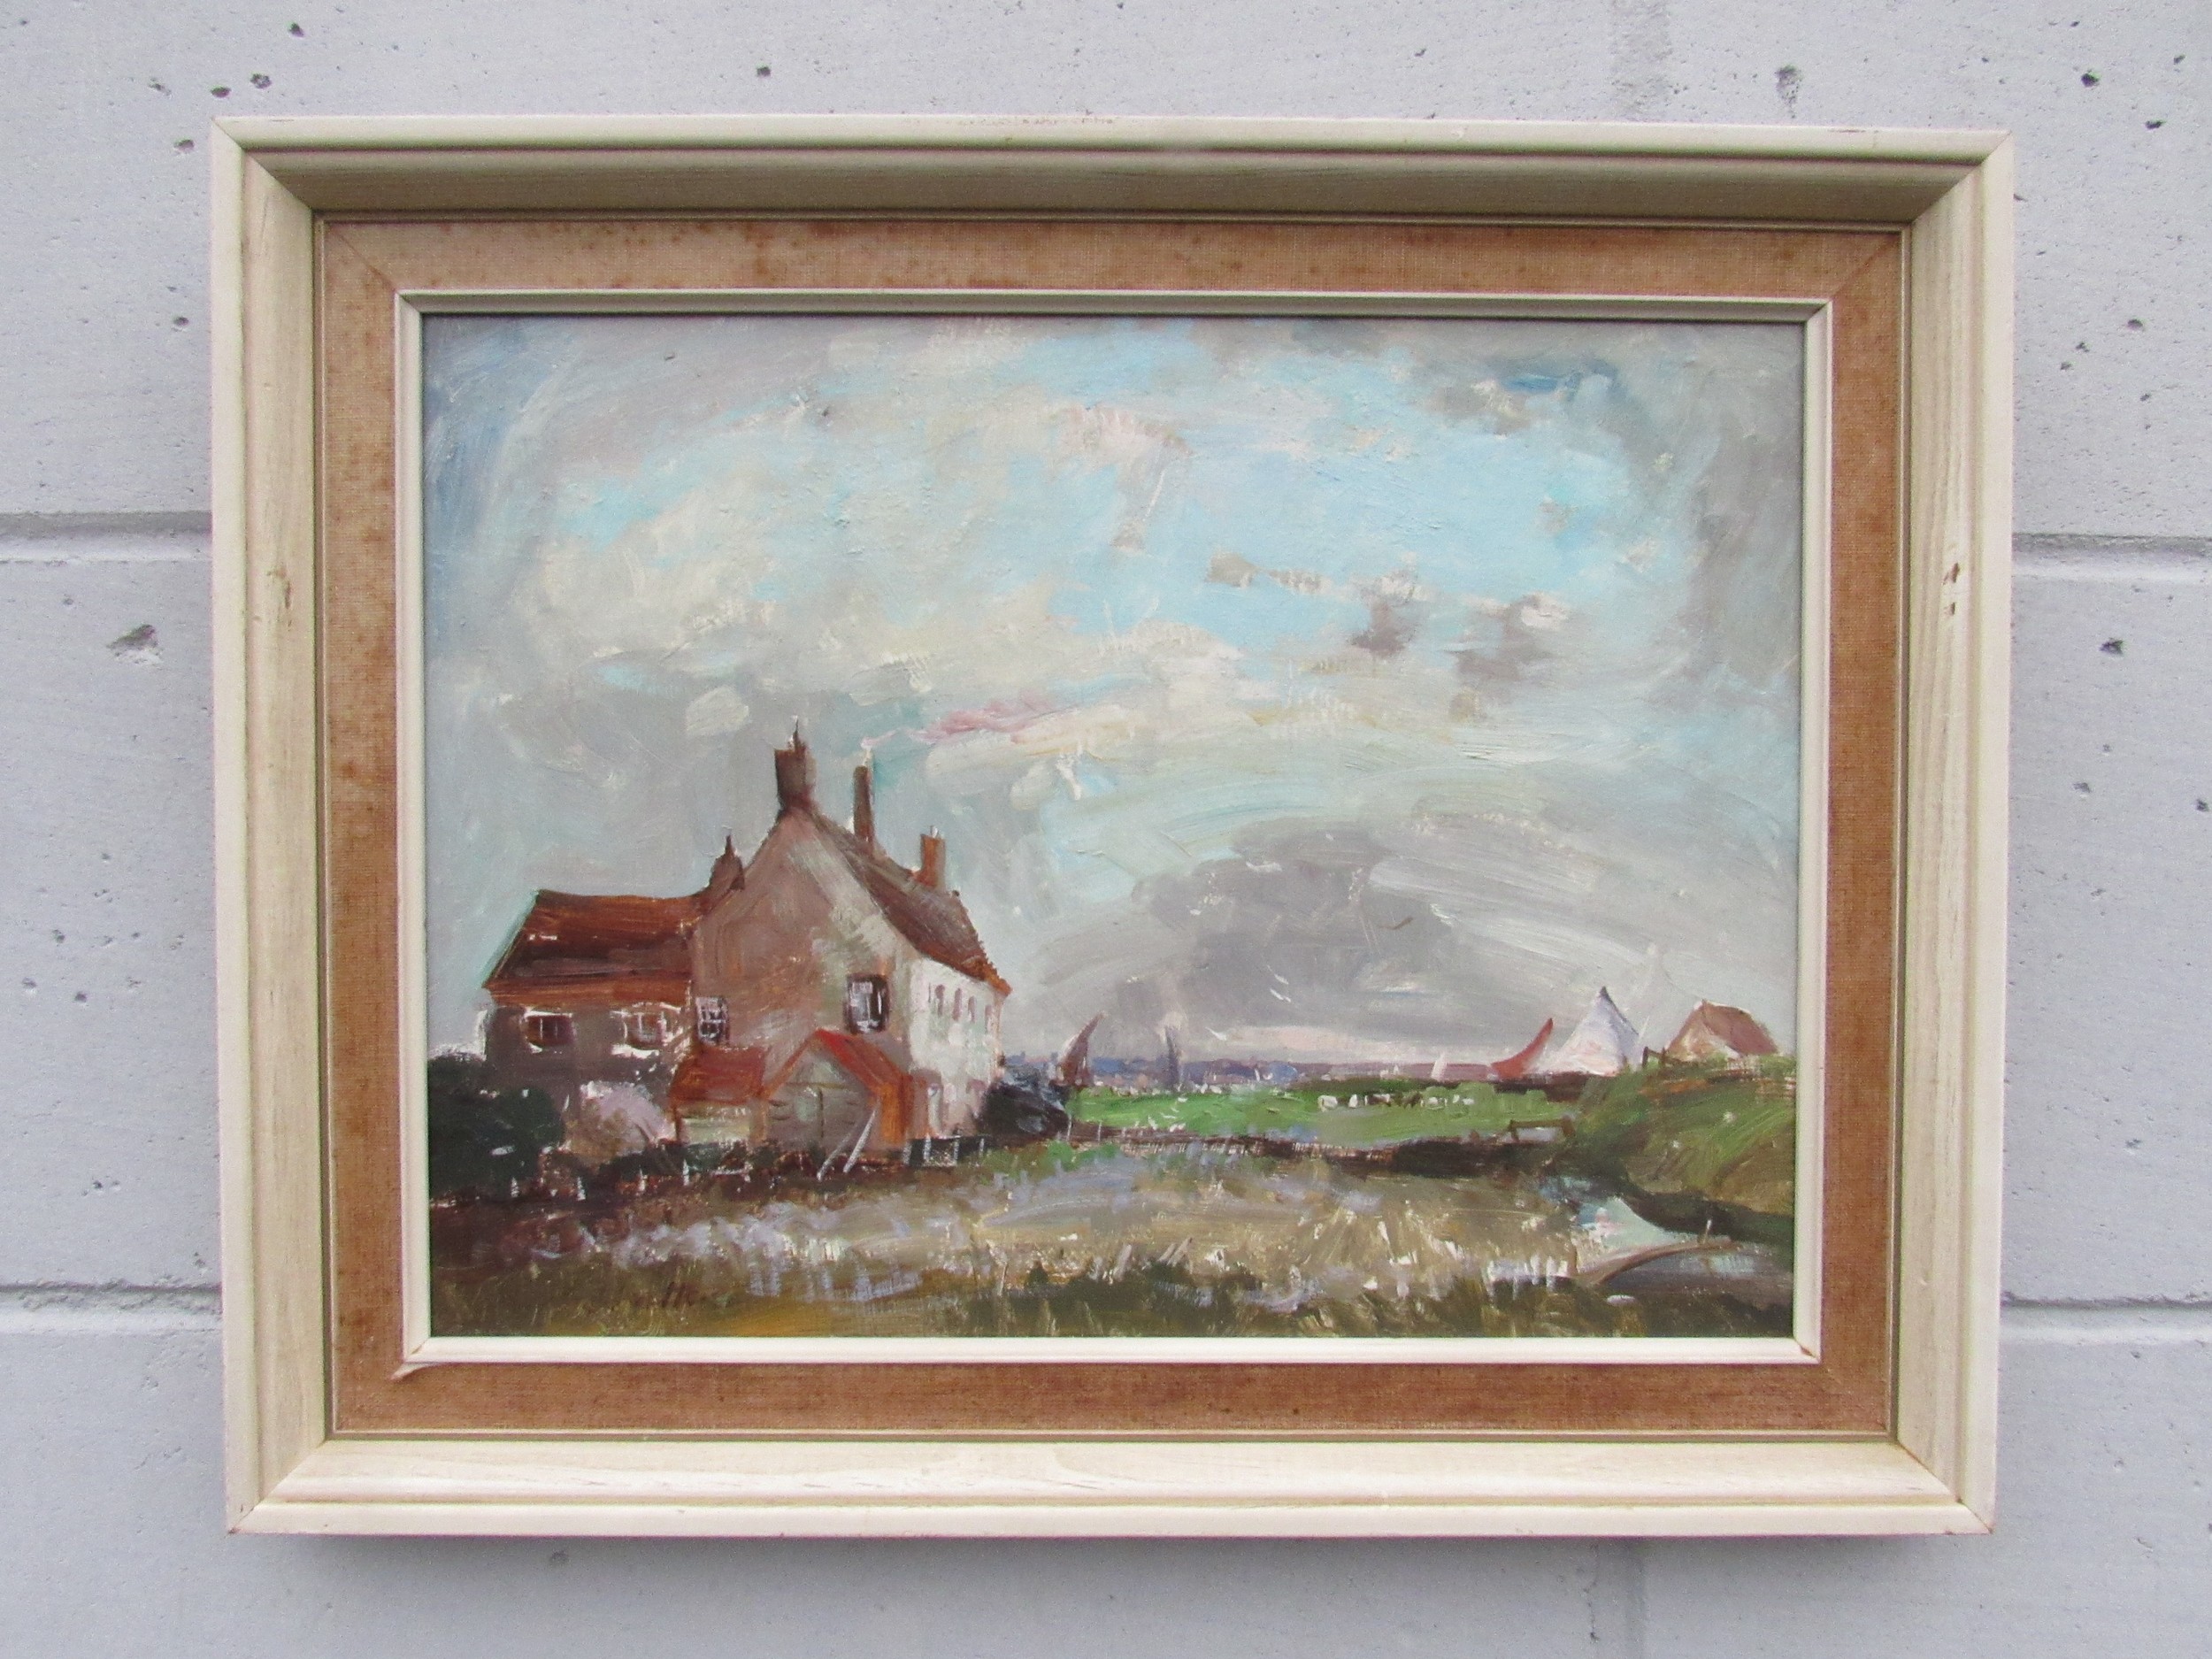 GEOFFREY CHATTEN (b.1938) A framed oil on board, 'House Near Berney Arms'. Signed bottom left. Image